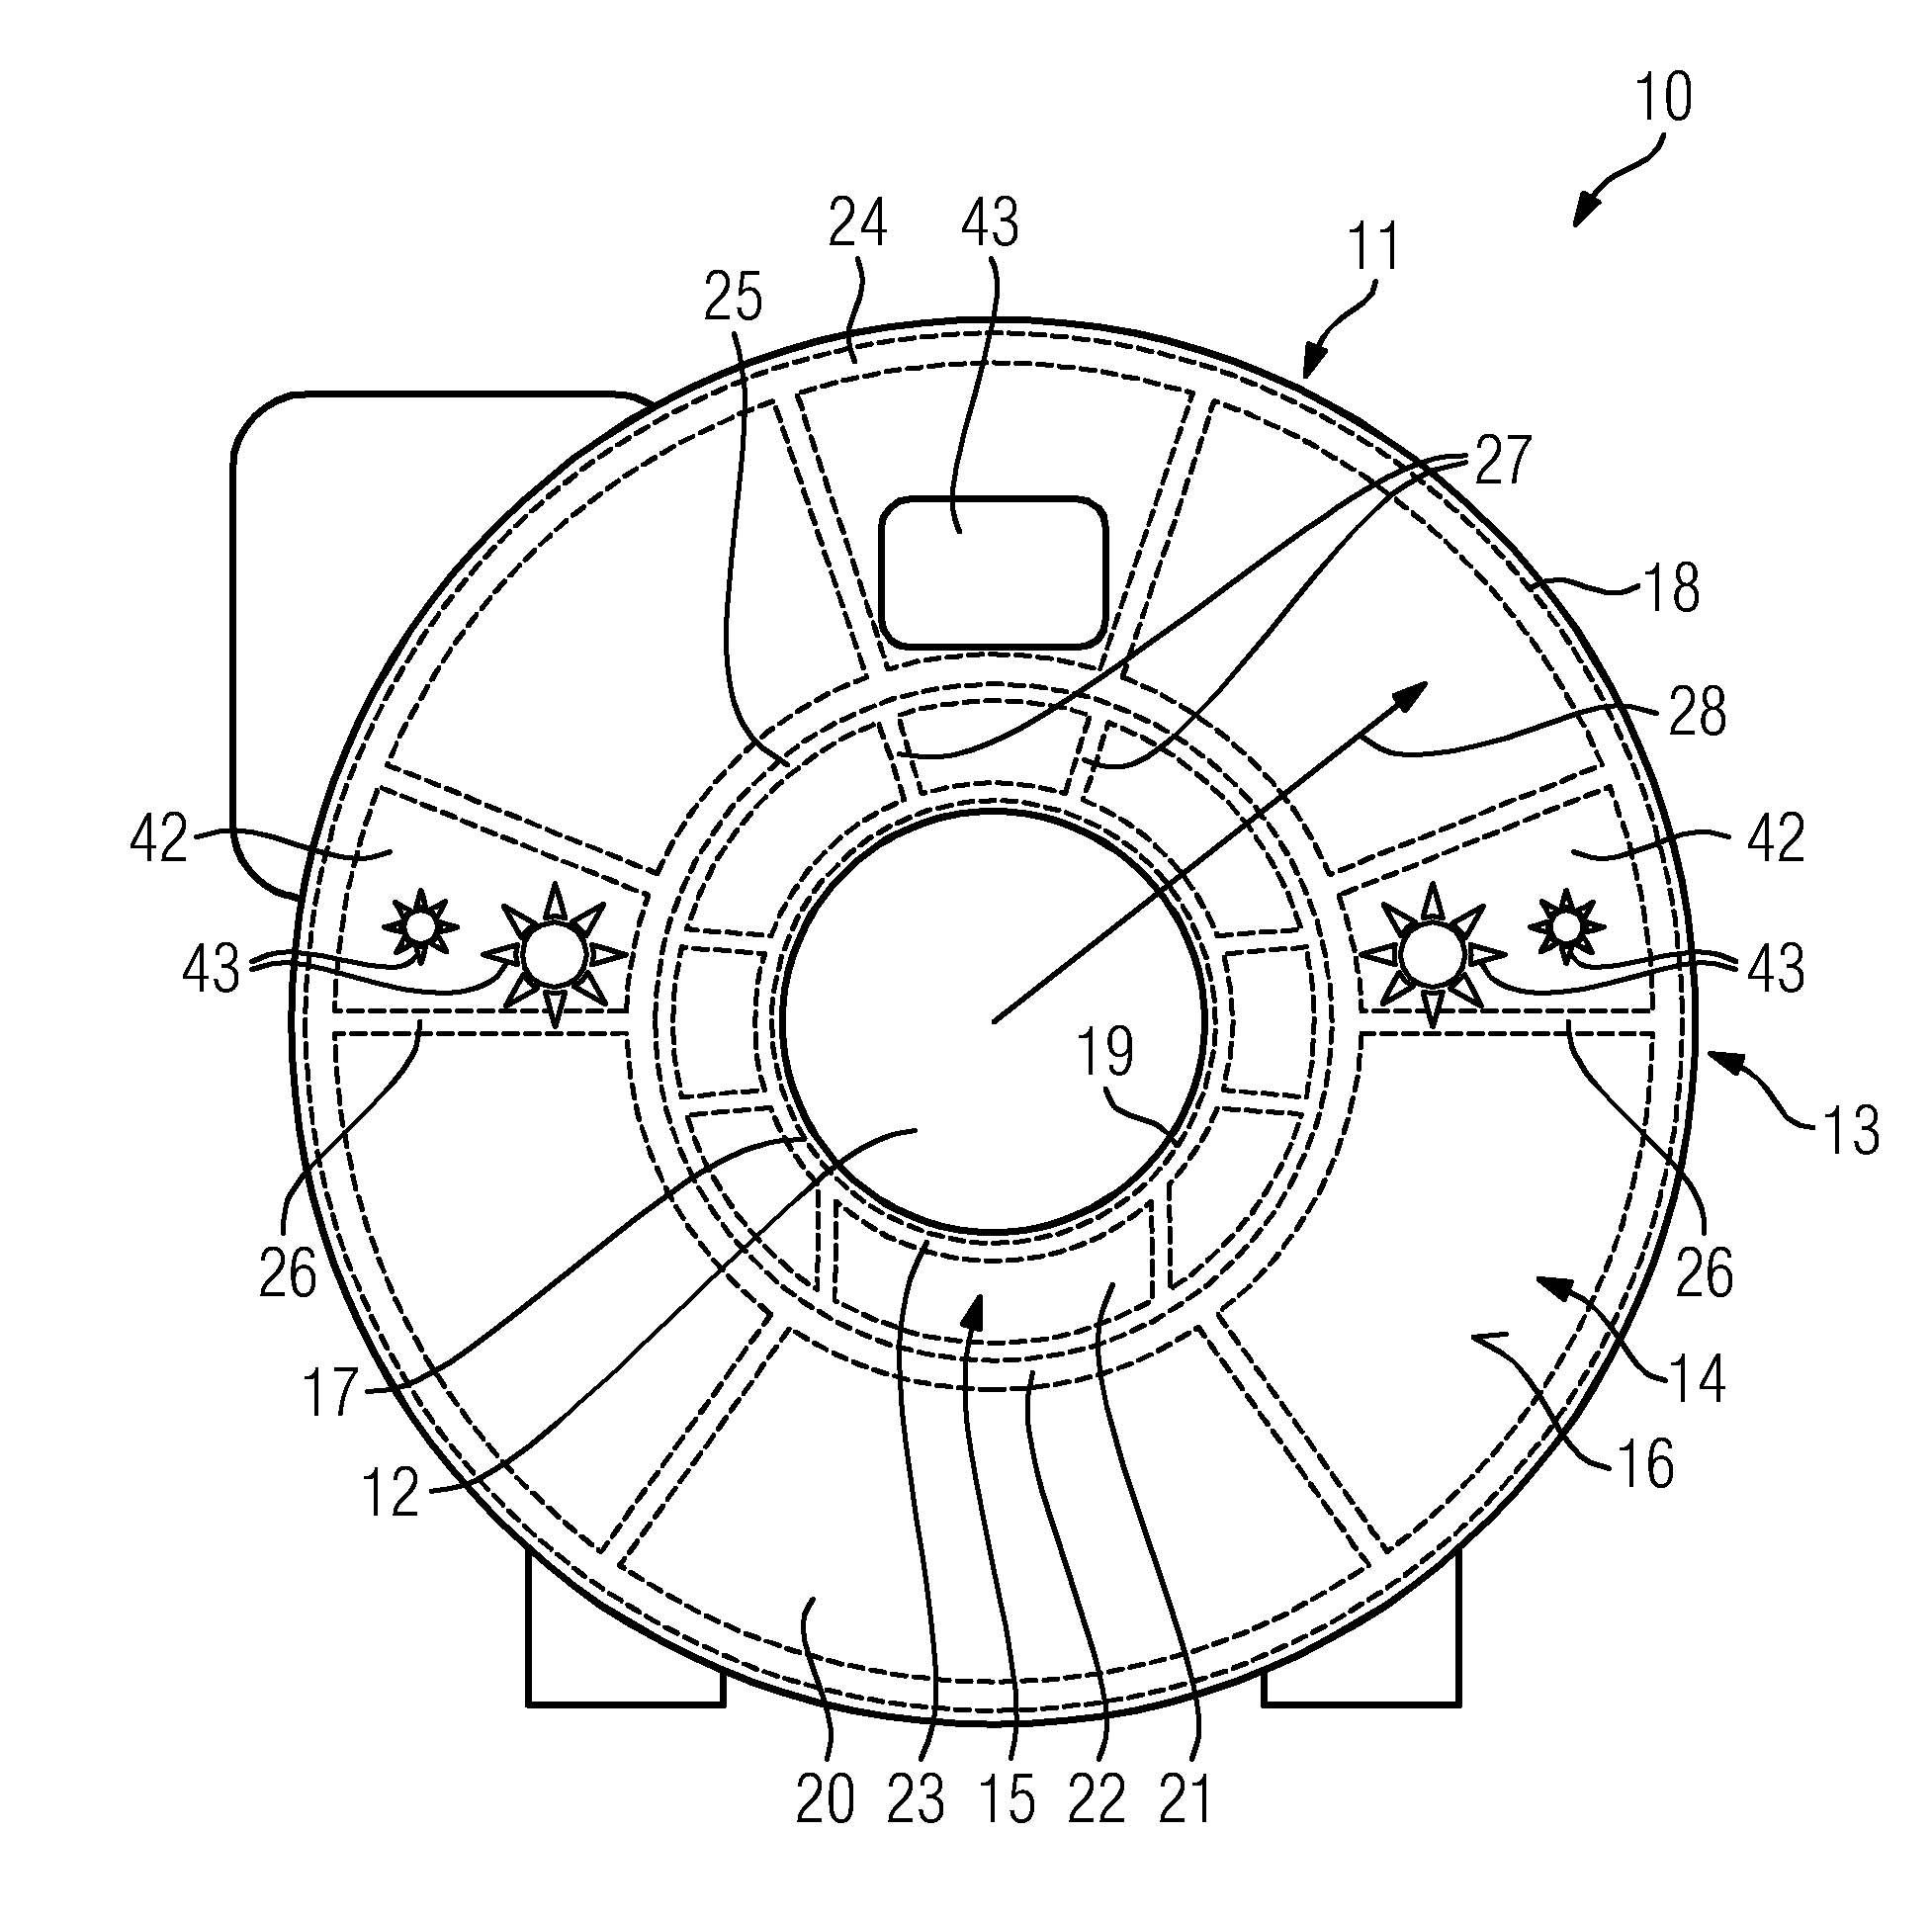 Medical imaging device comprising a housing unit that has a casing shell and method for producing a casing shell of the medical imaging device